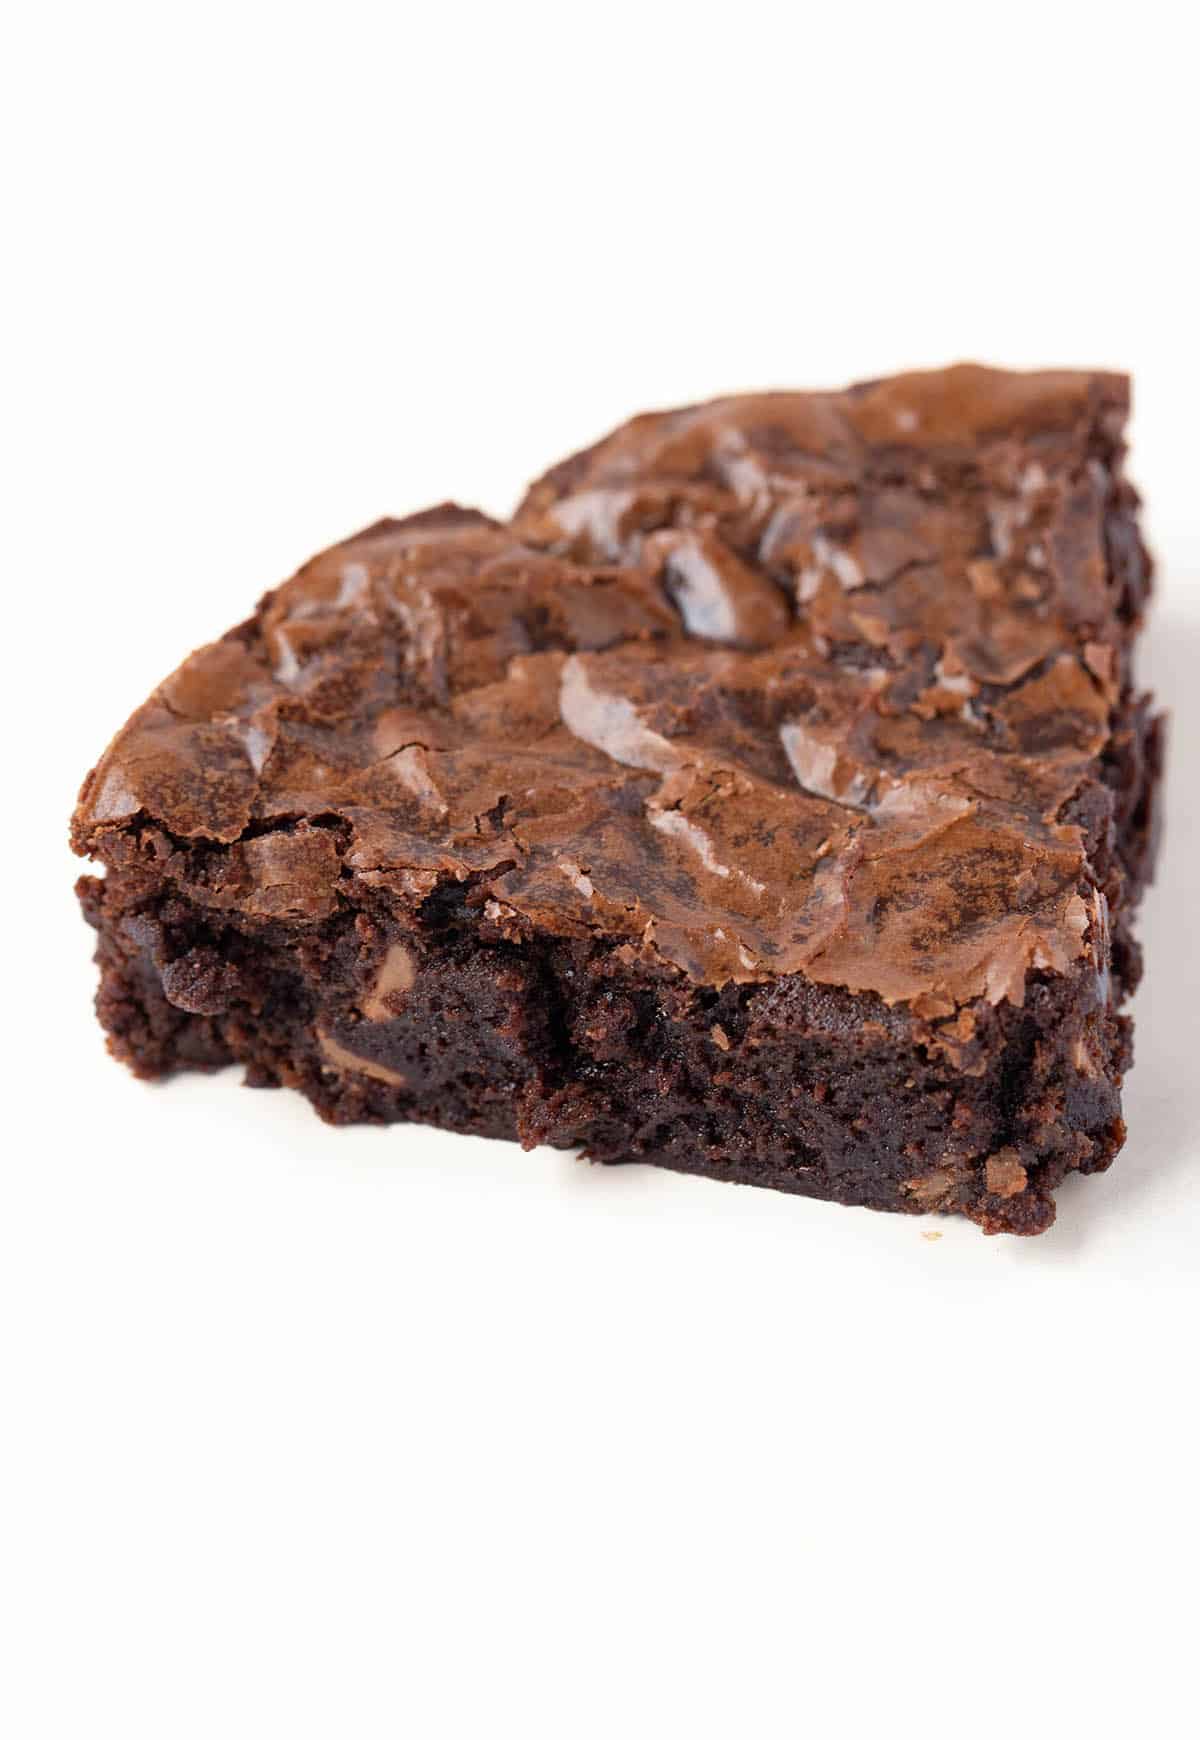 Close up of a homemade fudgy brownie with a gooey middle.